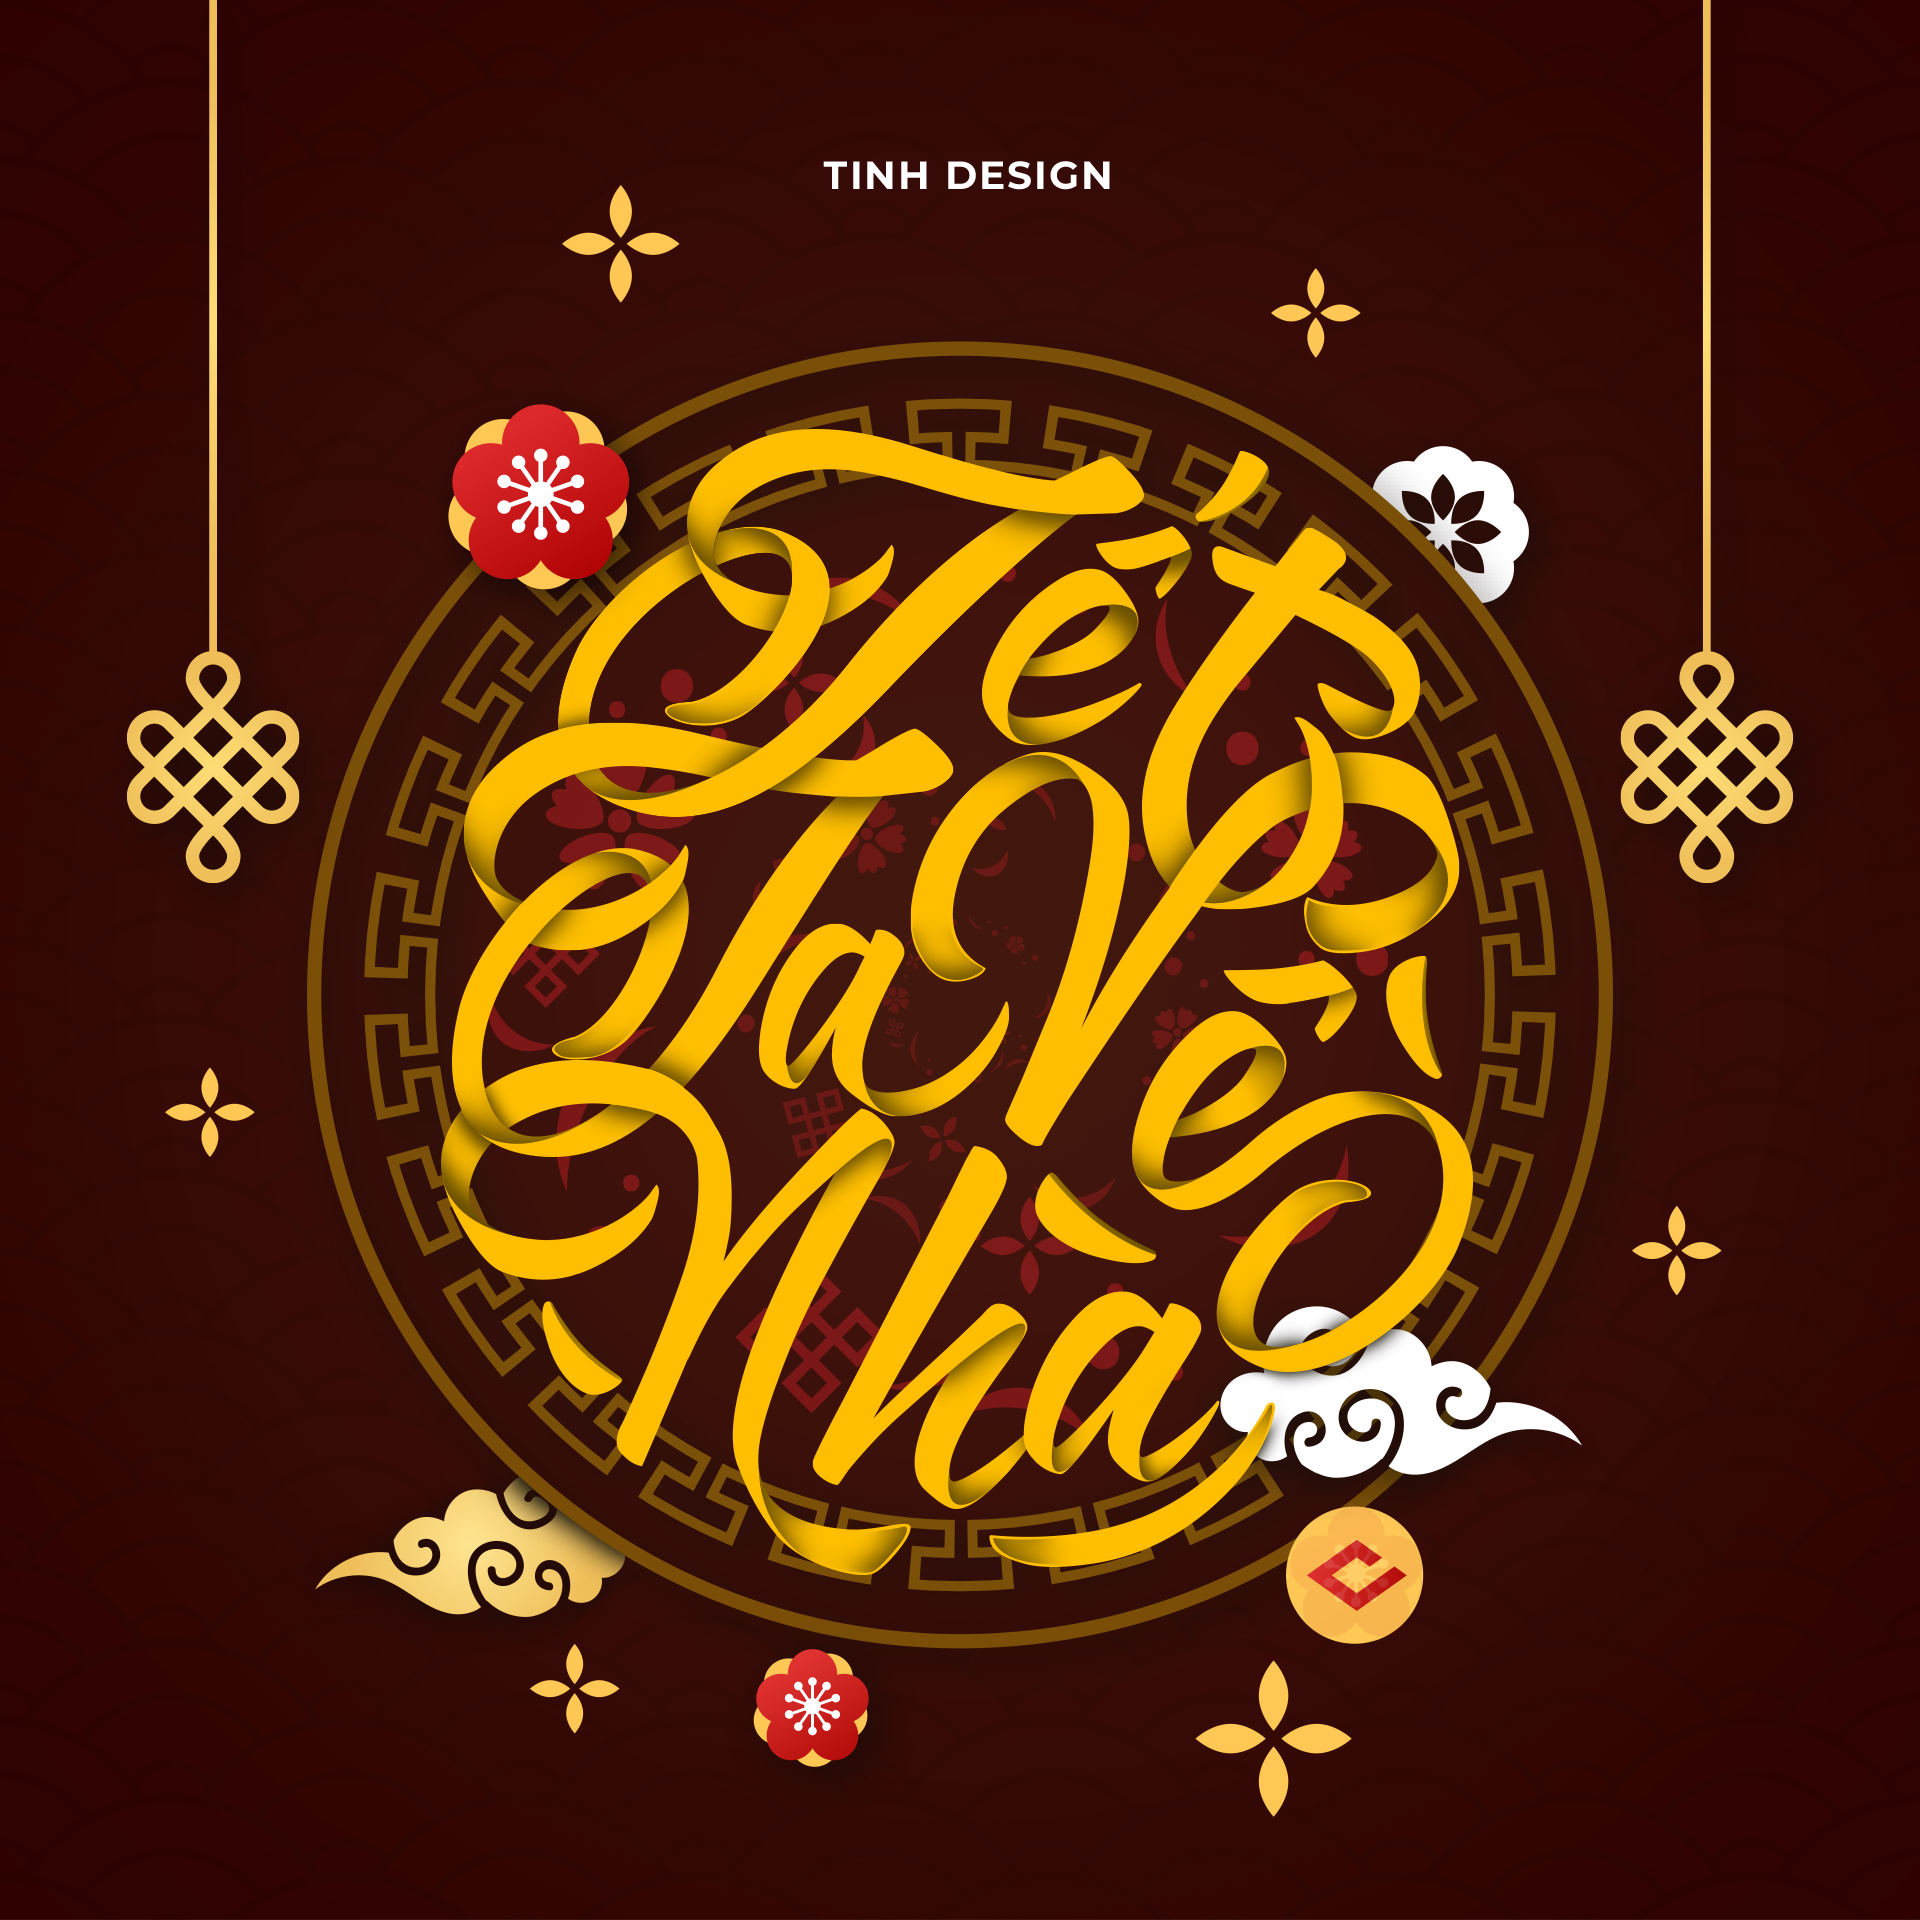 Remarkable Lettering and Typogrpahy Designs - 31